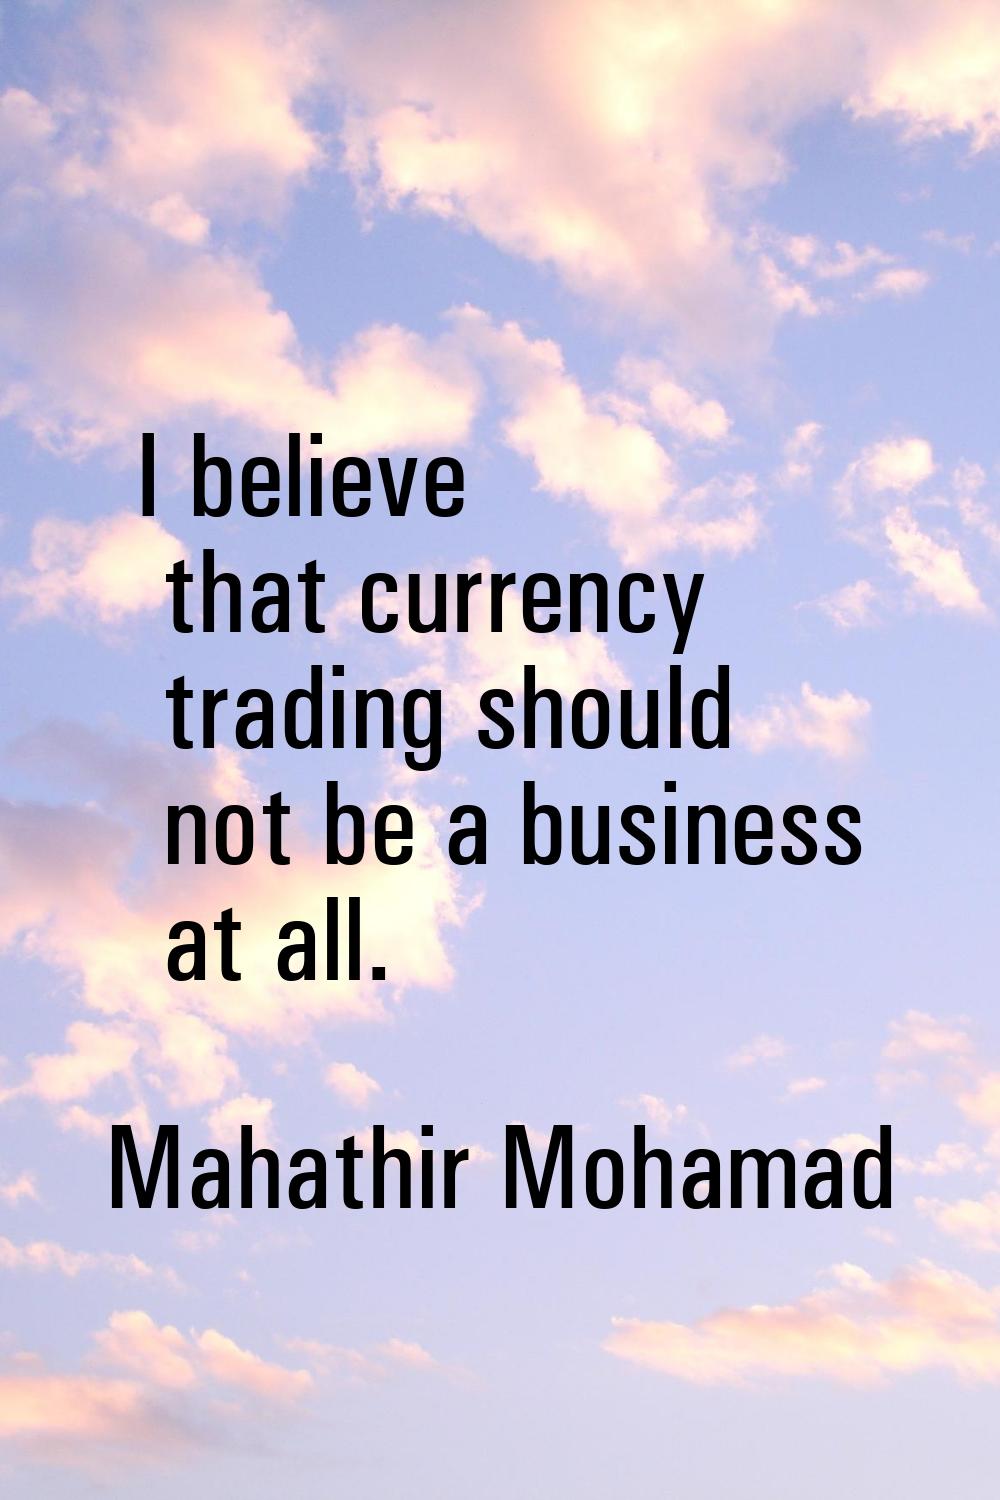 I believe that currency trading should not be a business at all.